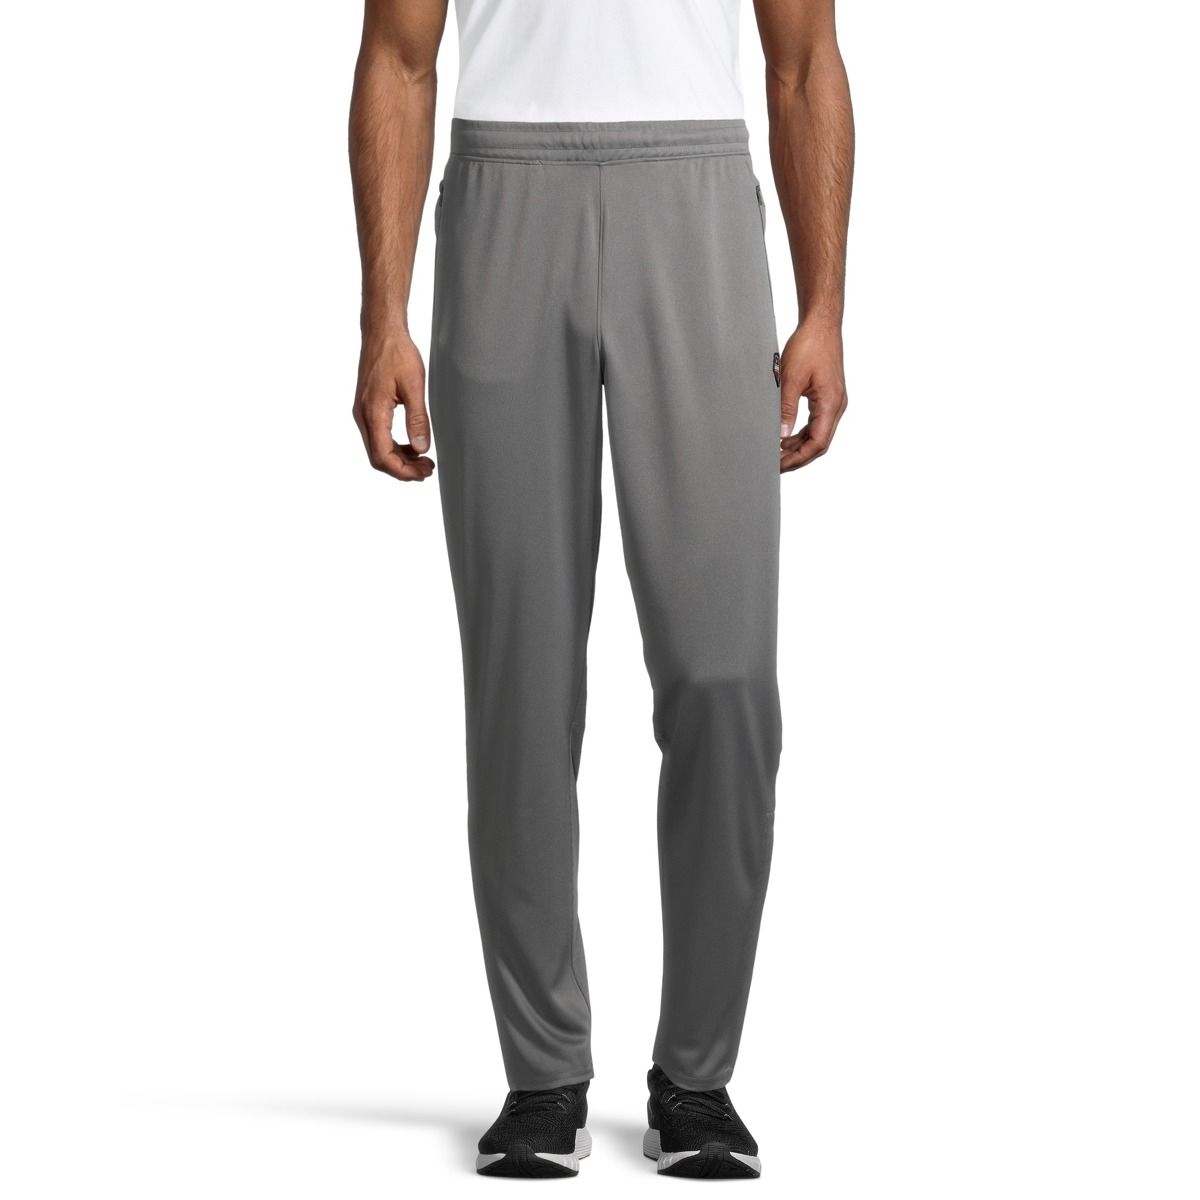 Lotto Men's Fortius Tapered Pants